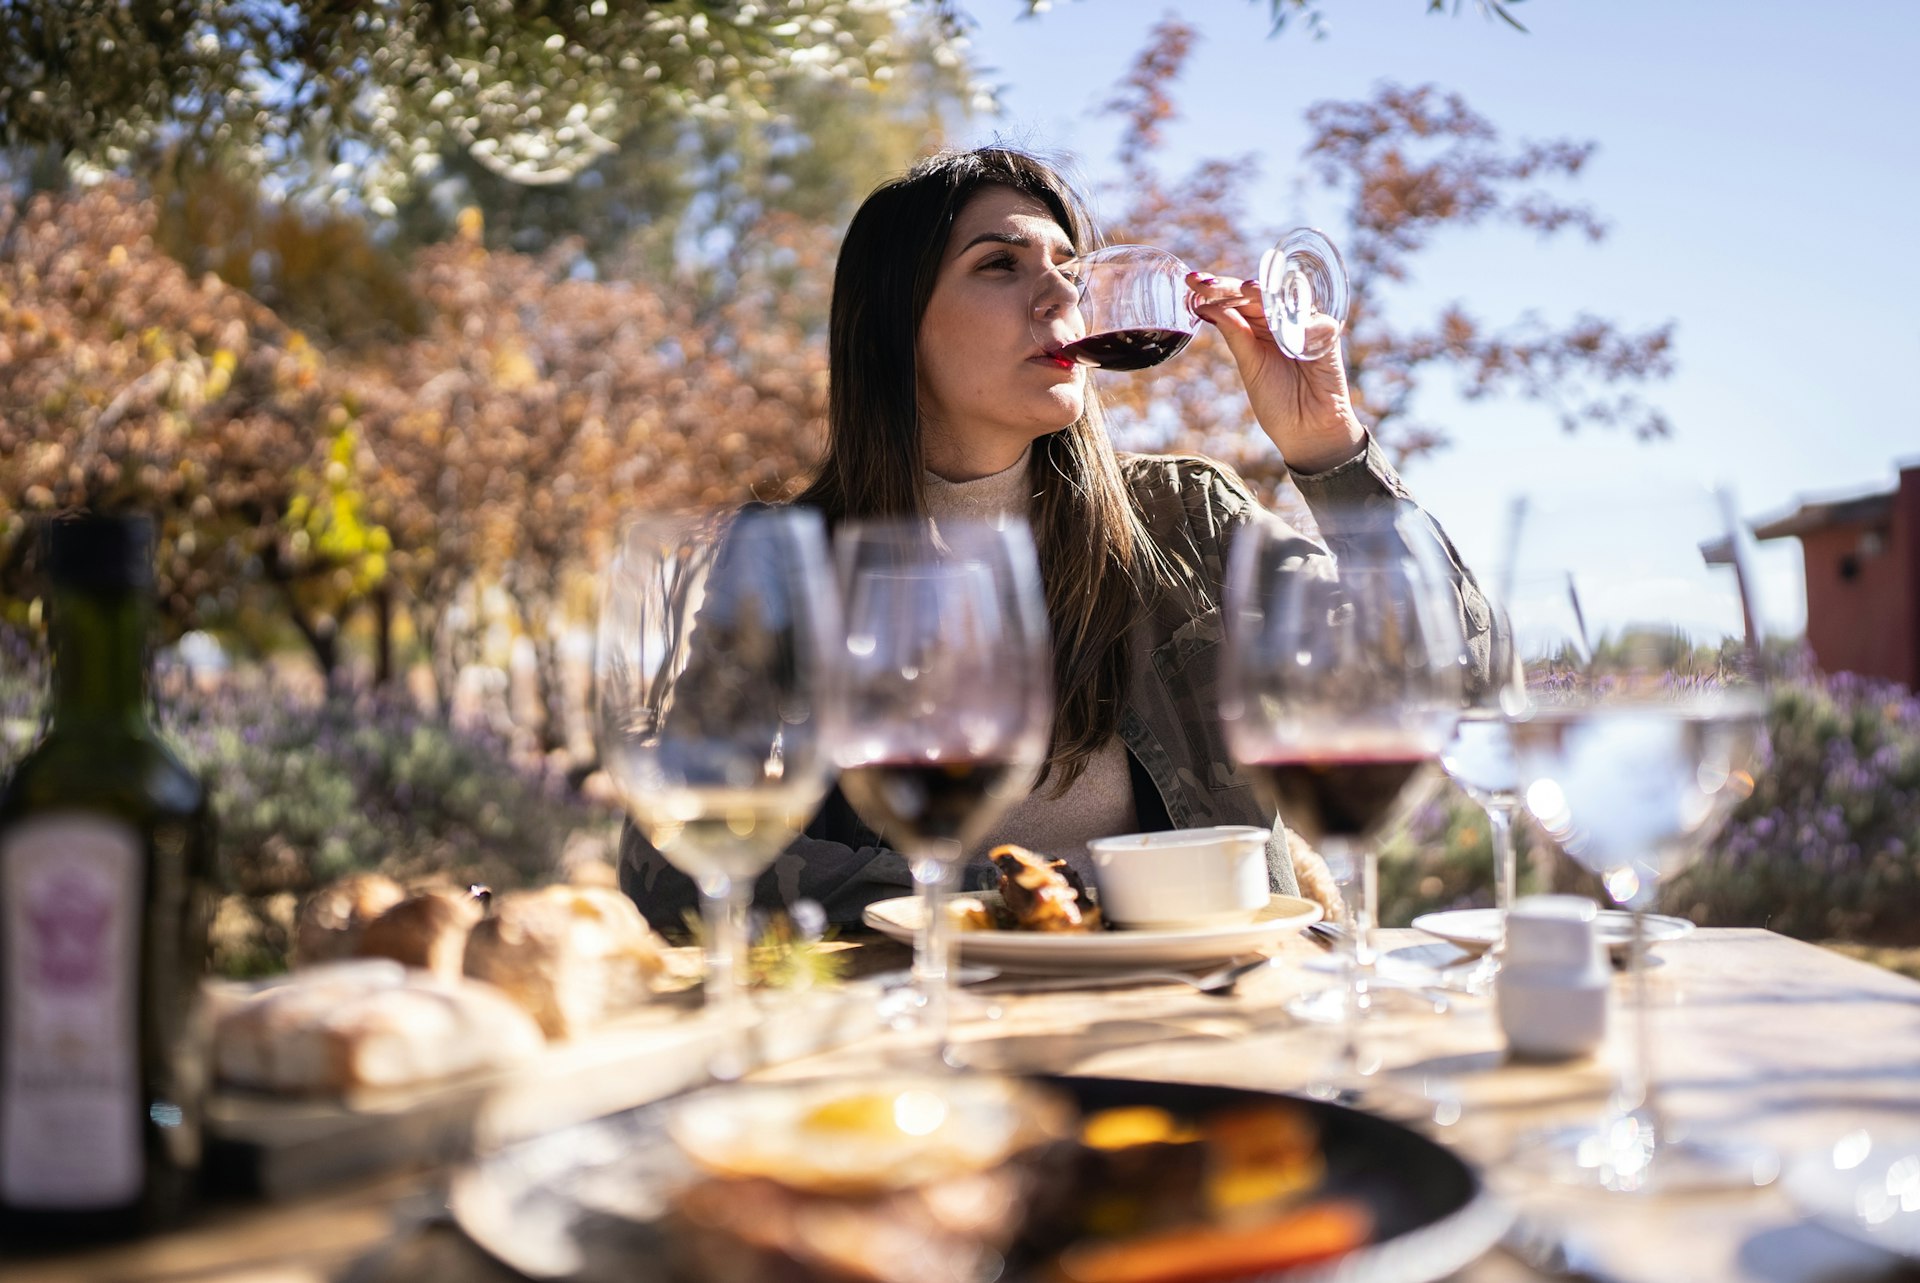 A woman takes a sip of red wine on a wine-tasting tour in Argentina